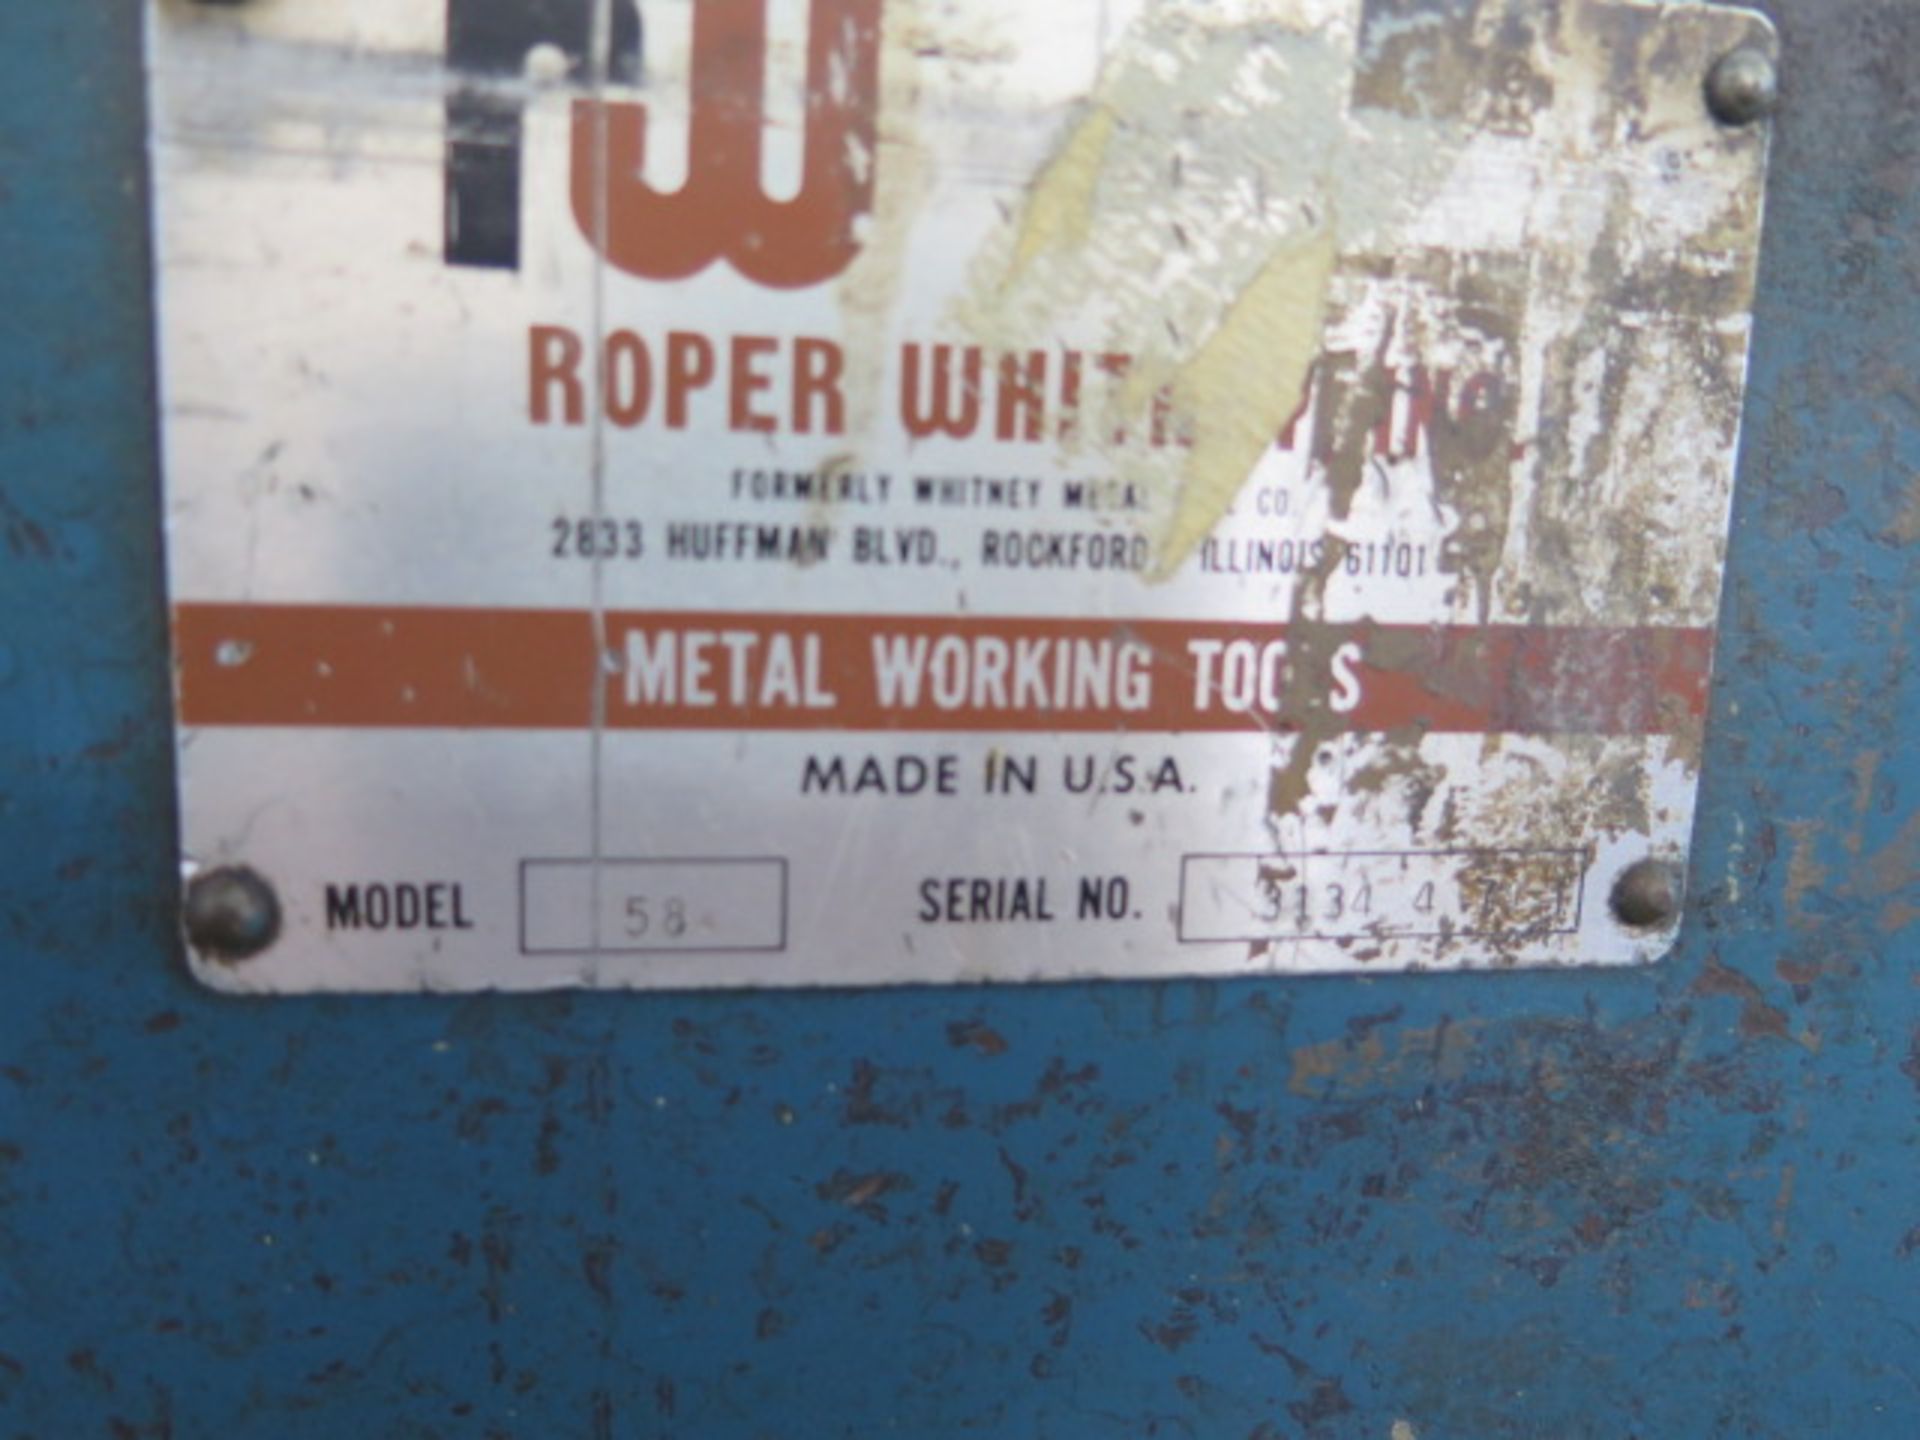 Roper Whitney mdl. 58 Kick Punch s/n 3134-4-74 w/ 18” Throat and Punch Tooling - Image 4 of 4